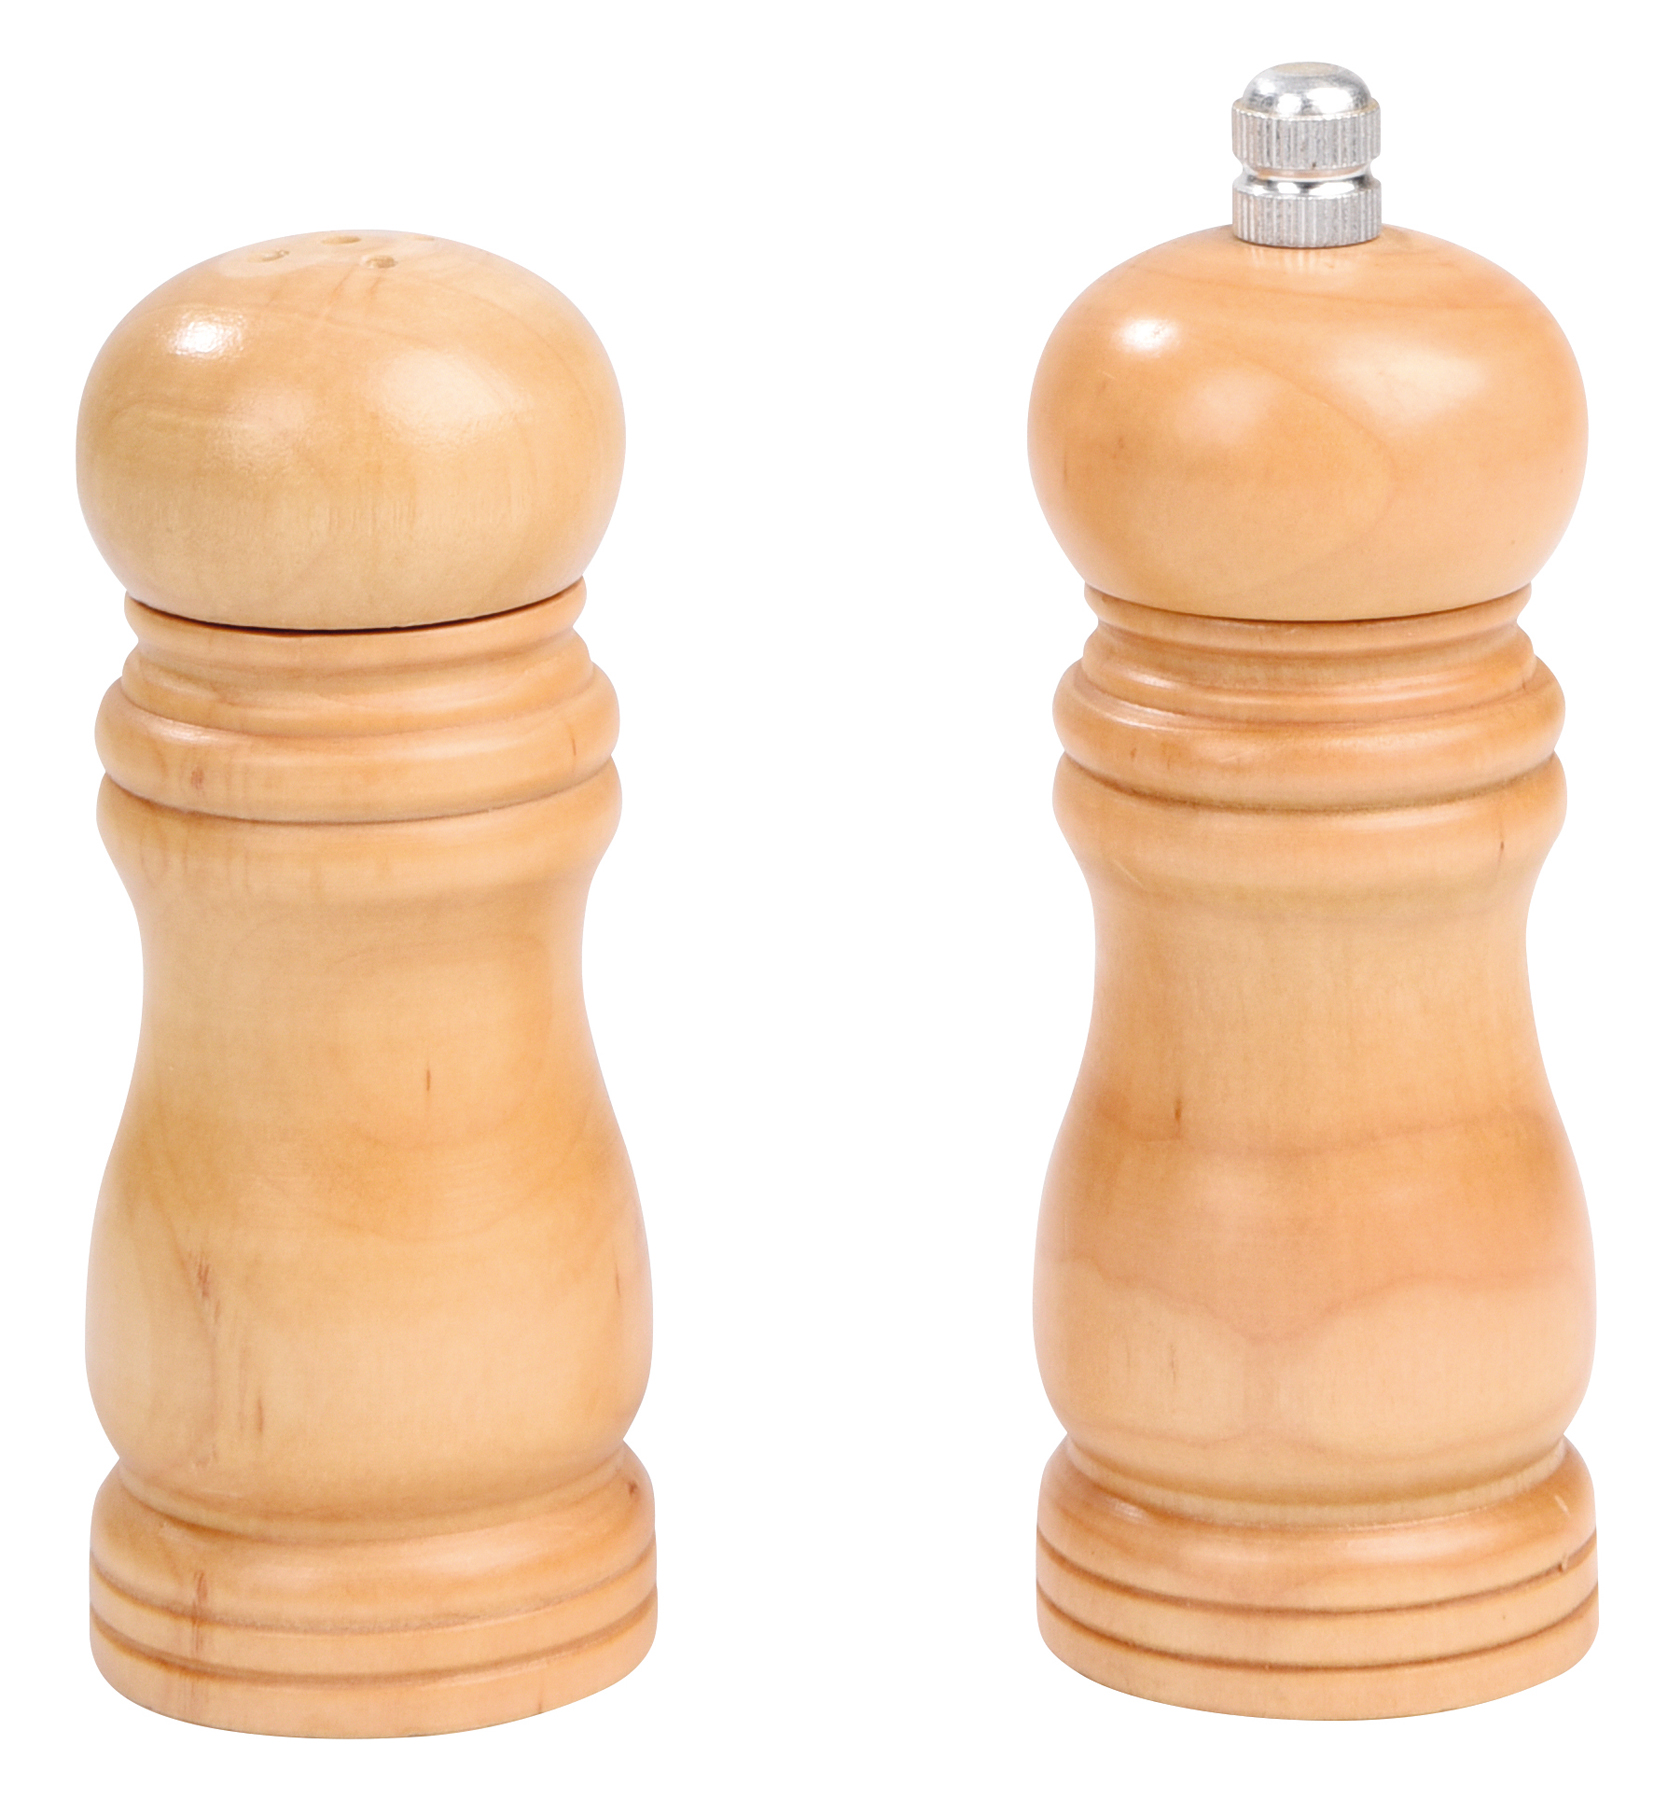 Salt shaker and pepper mill set DUO SPICE - brown